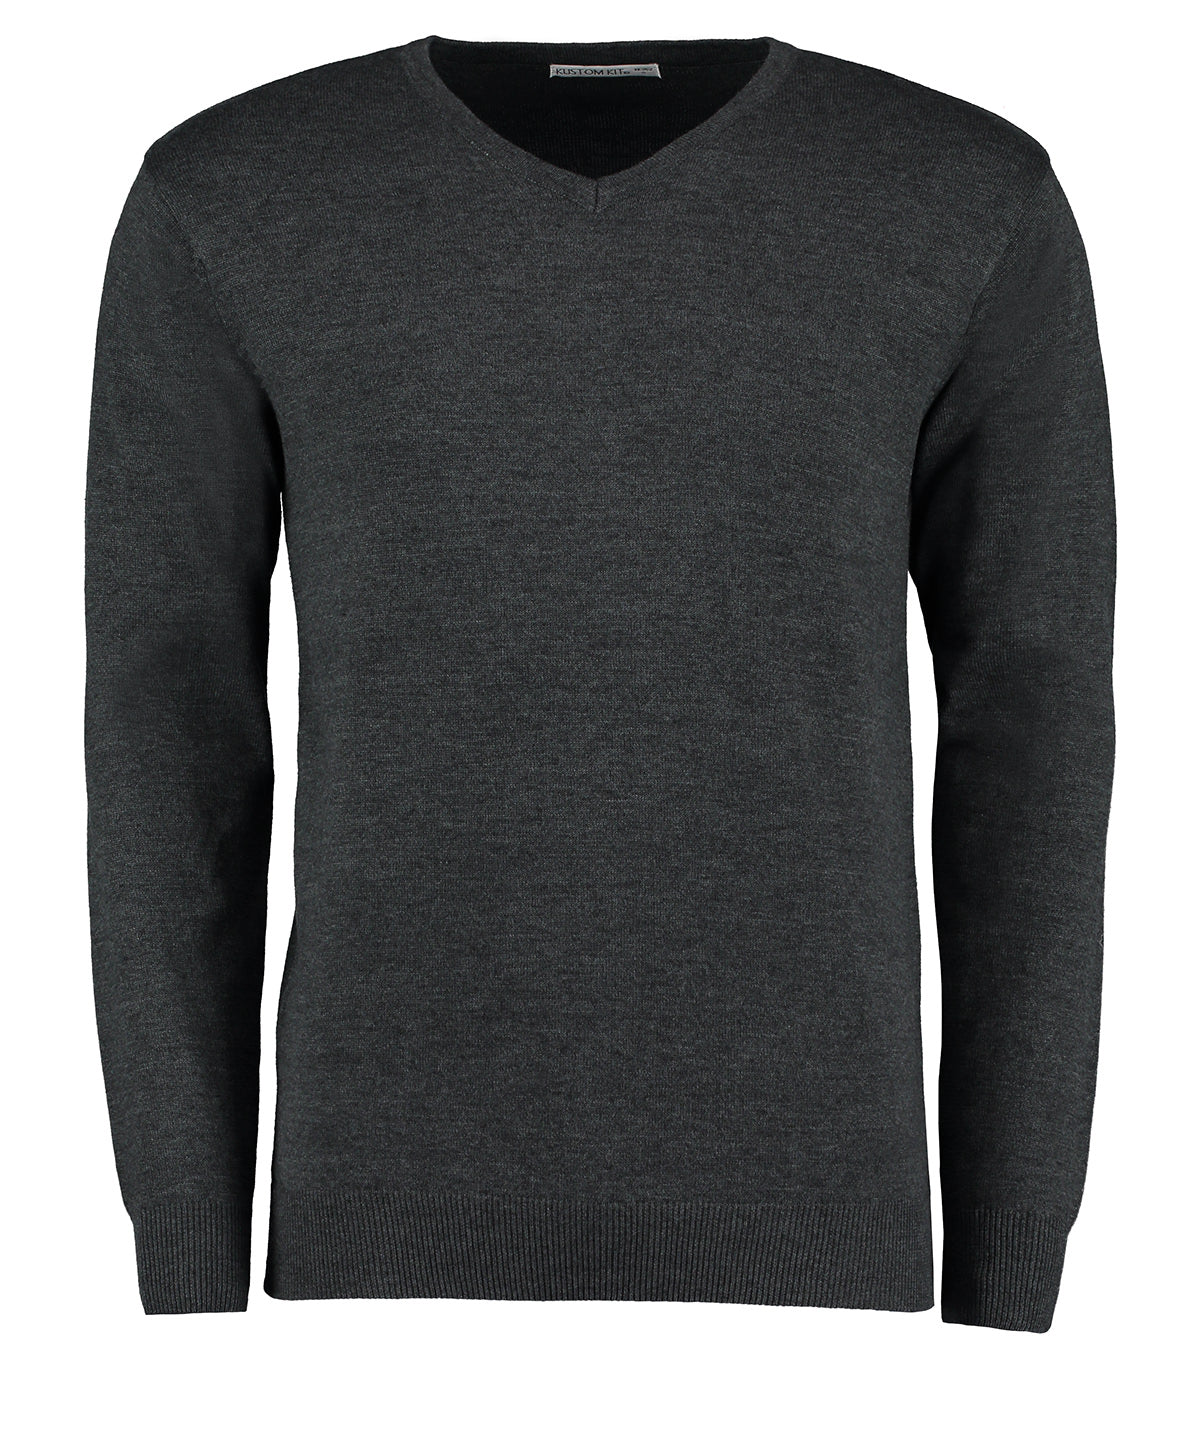 Personalised Knitted Jumpers - Black Kustom Kit Arundel v-neck sweater long sleeve (classic fit)